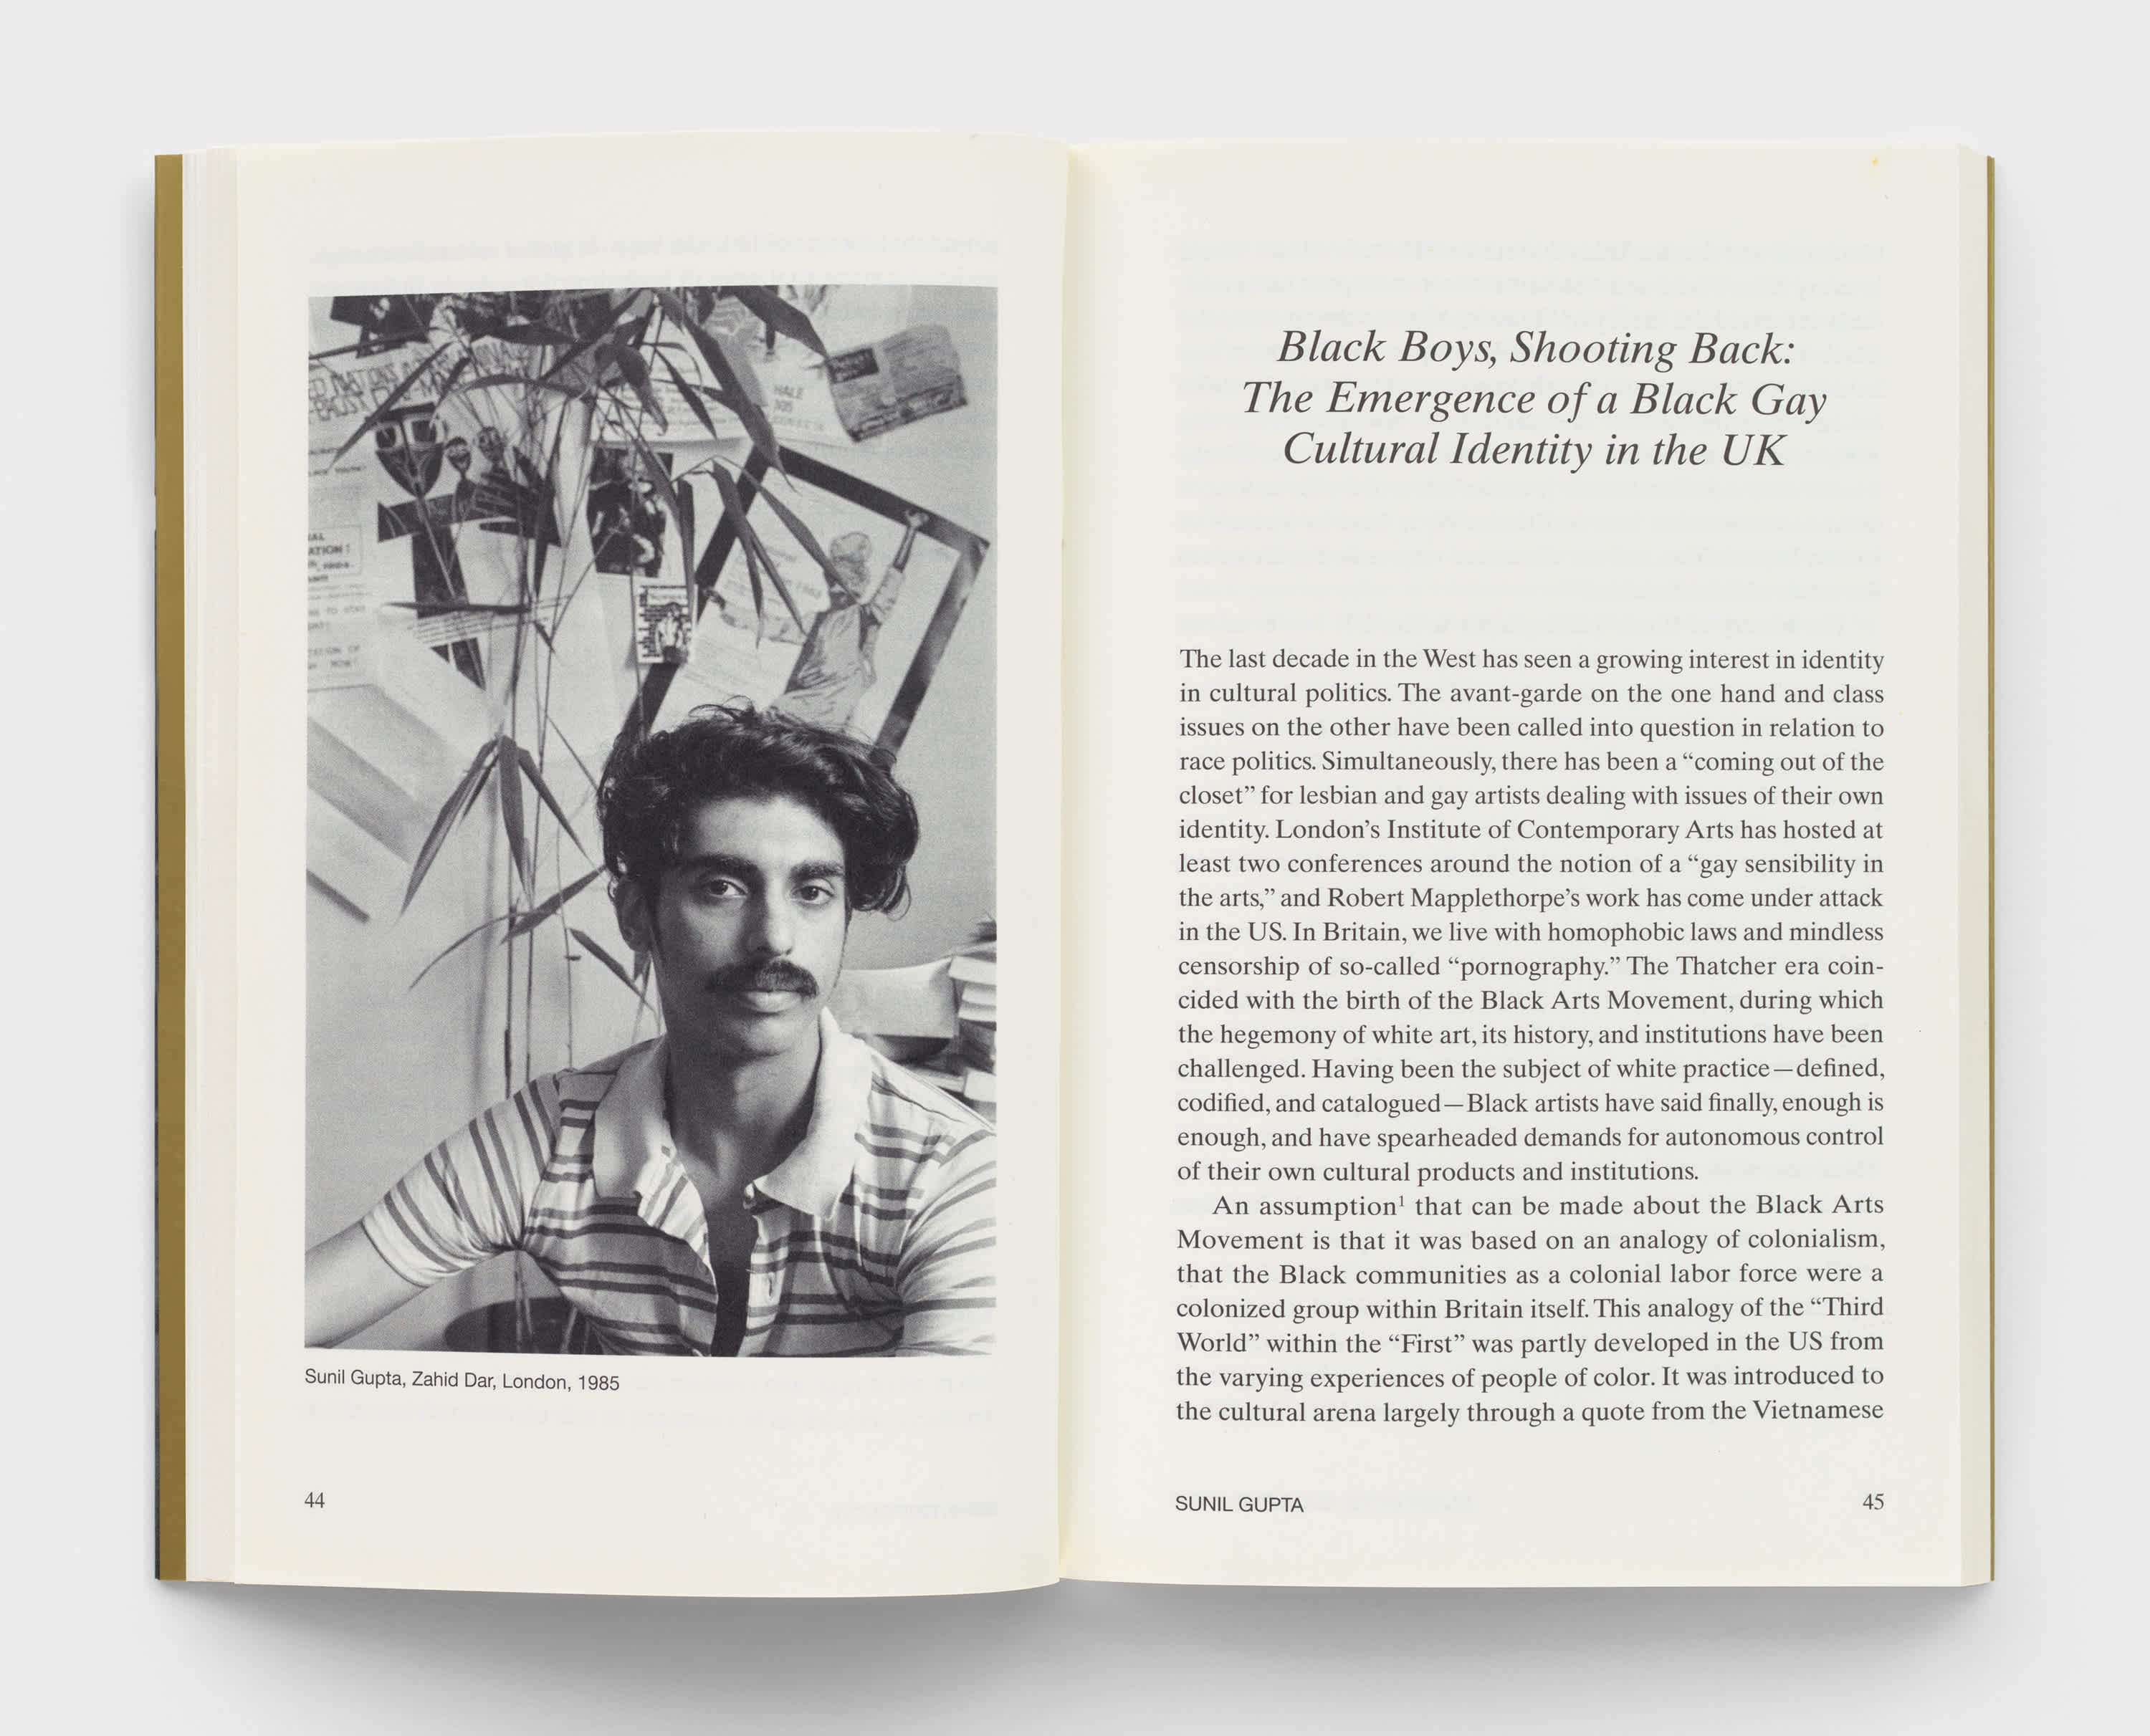 Open book with cream colored pages. A black and white photograph of a mustached man, wearing a striped shirt is on the left page. Essay text is on the right page. 